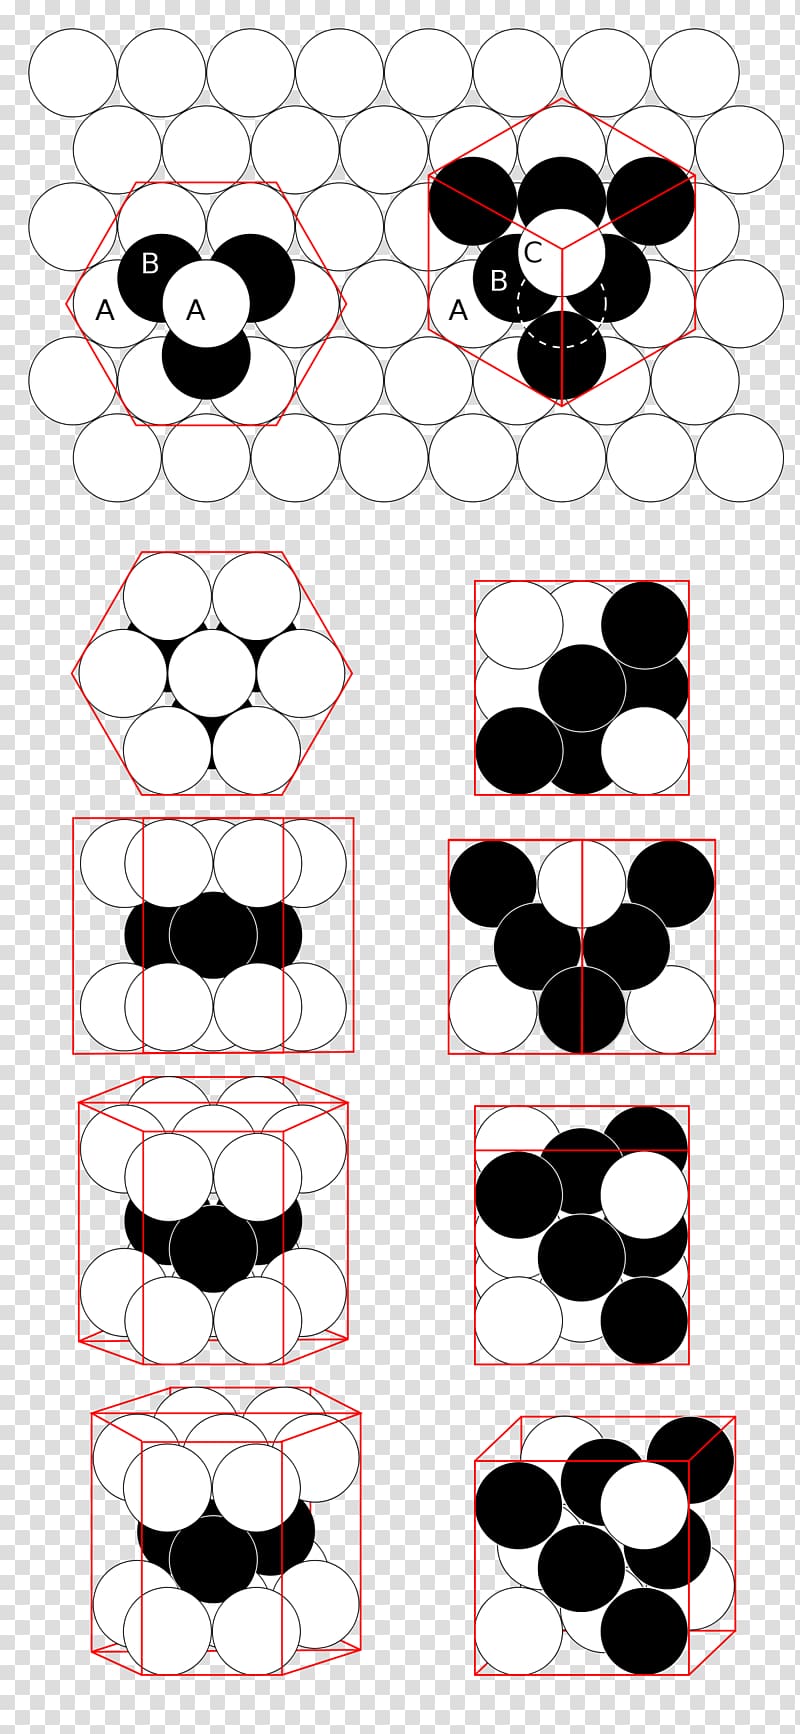 Close-packing of equal spheres Sphere packing Packing problems Atomic packing factor, planes transparent background PNG clipart